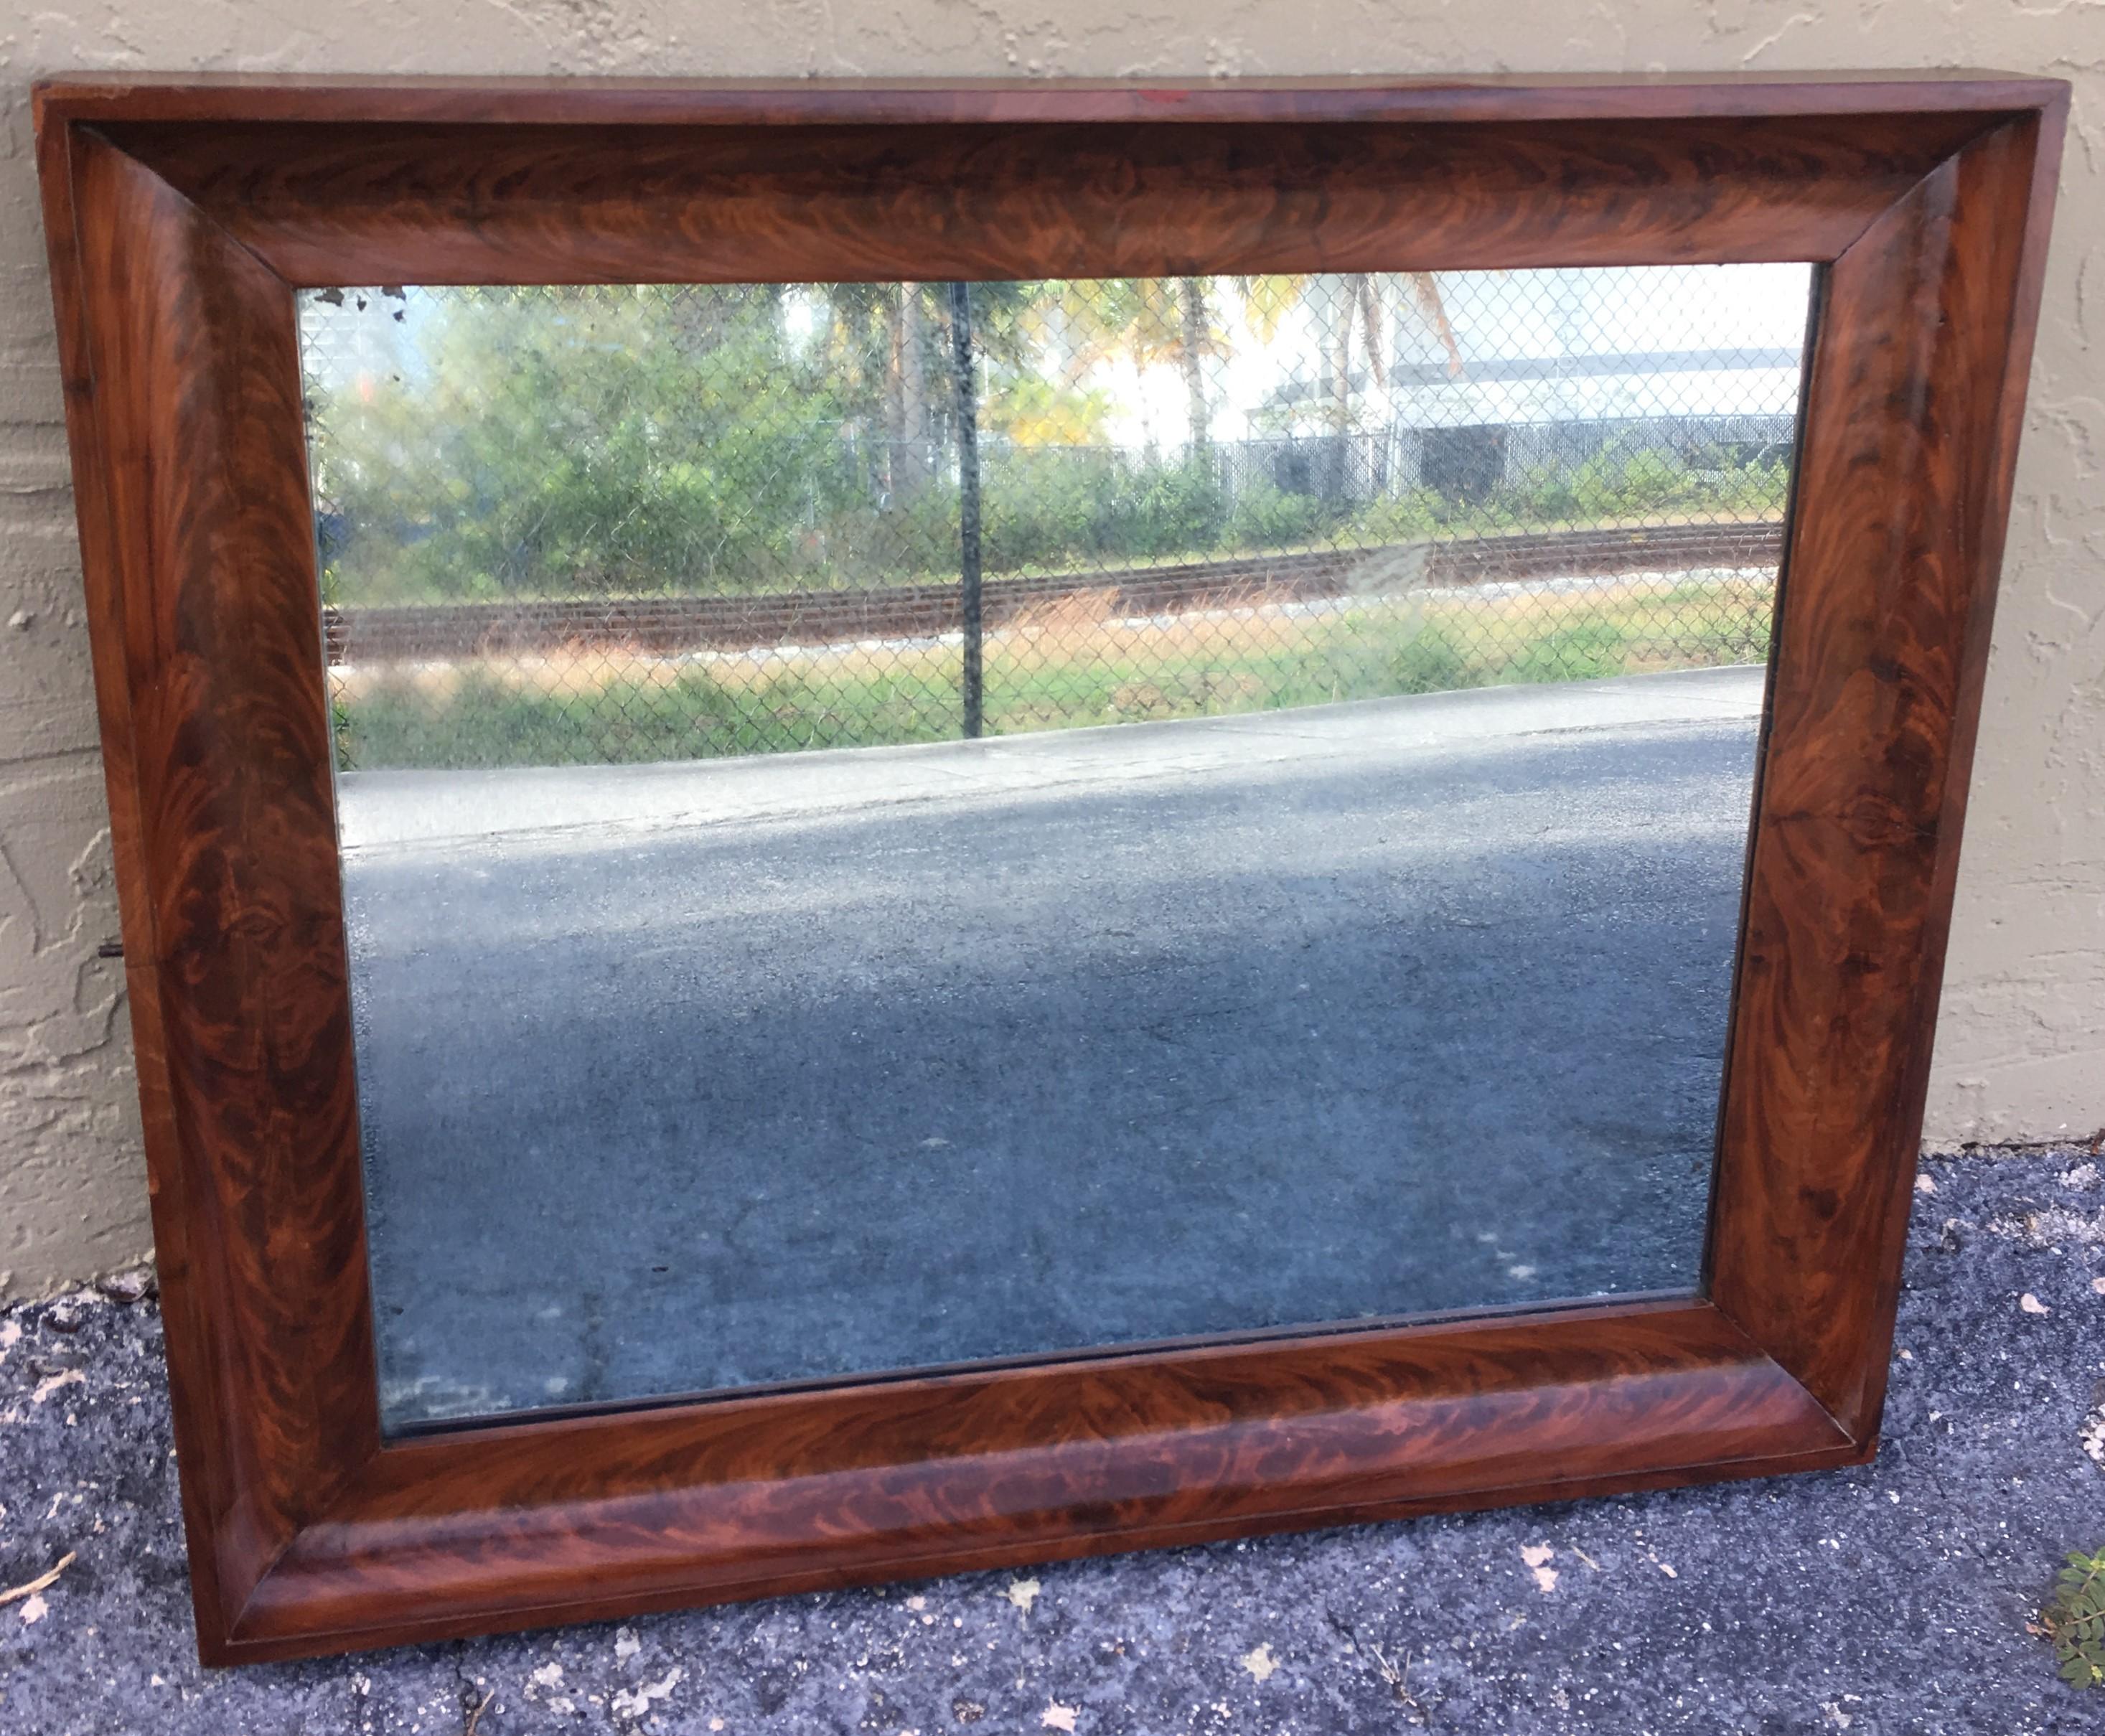 This is a beautiful antique Spanish flame mahogany wall mirror, circa 1840.

The mahogany frame is beautifullybeveled in the border 

The quality and craftsmanship of this stunning piece is absolutely superb.

In excellent condition having